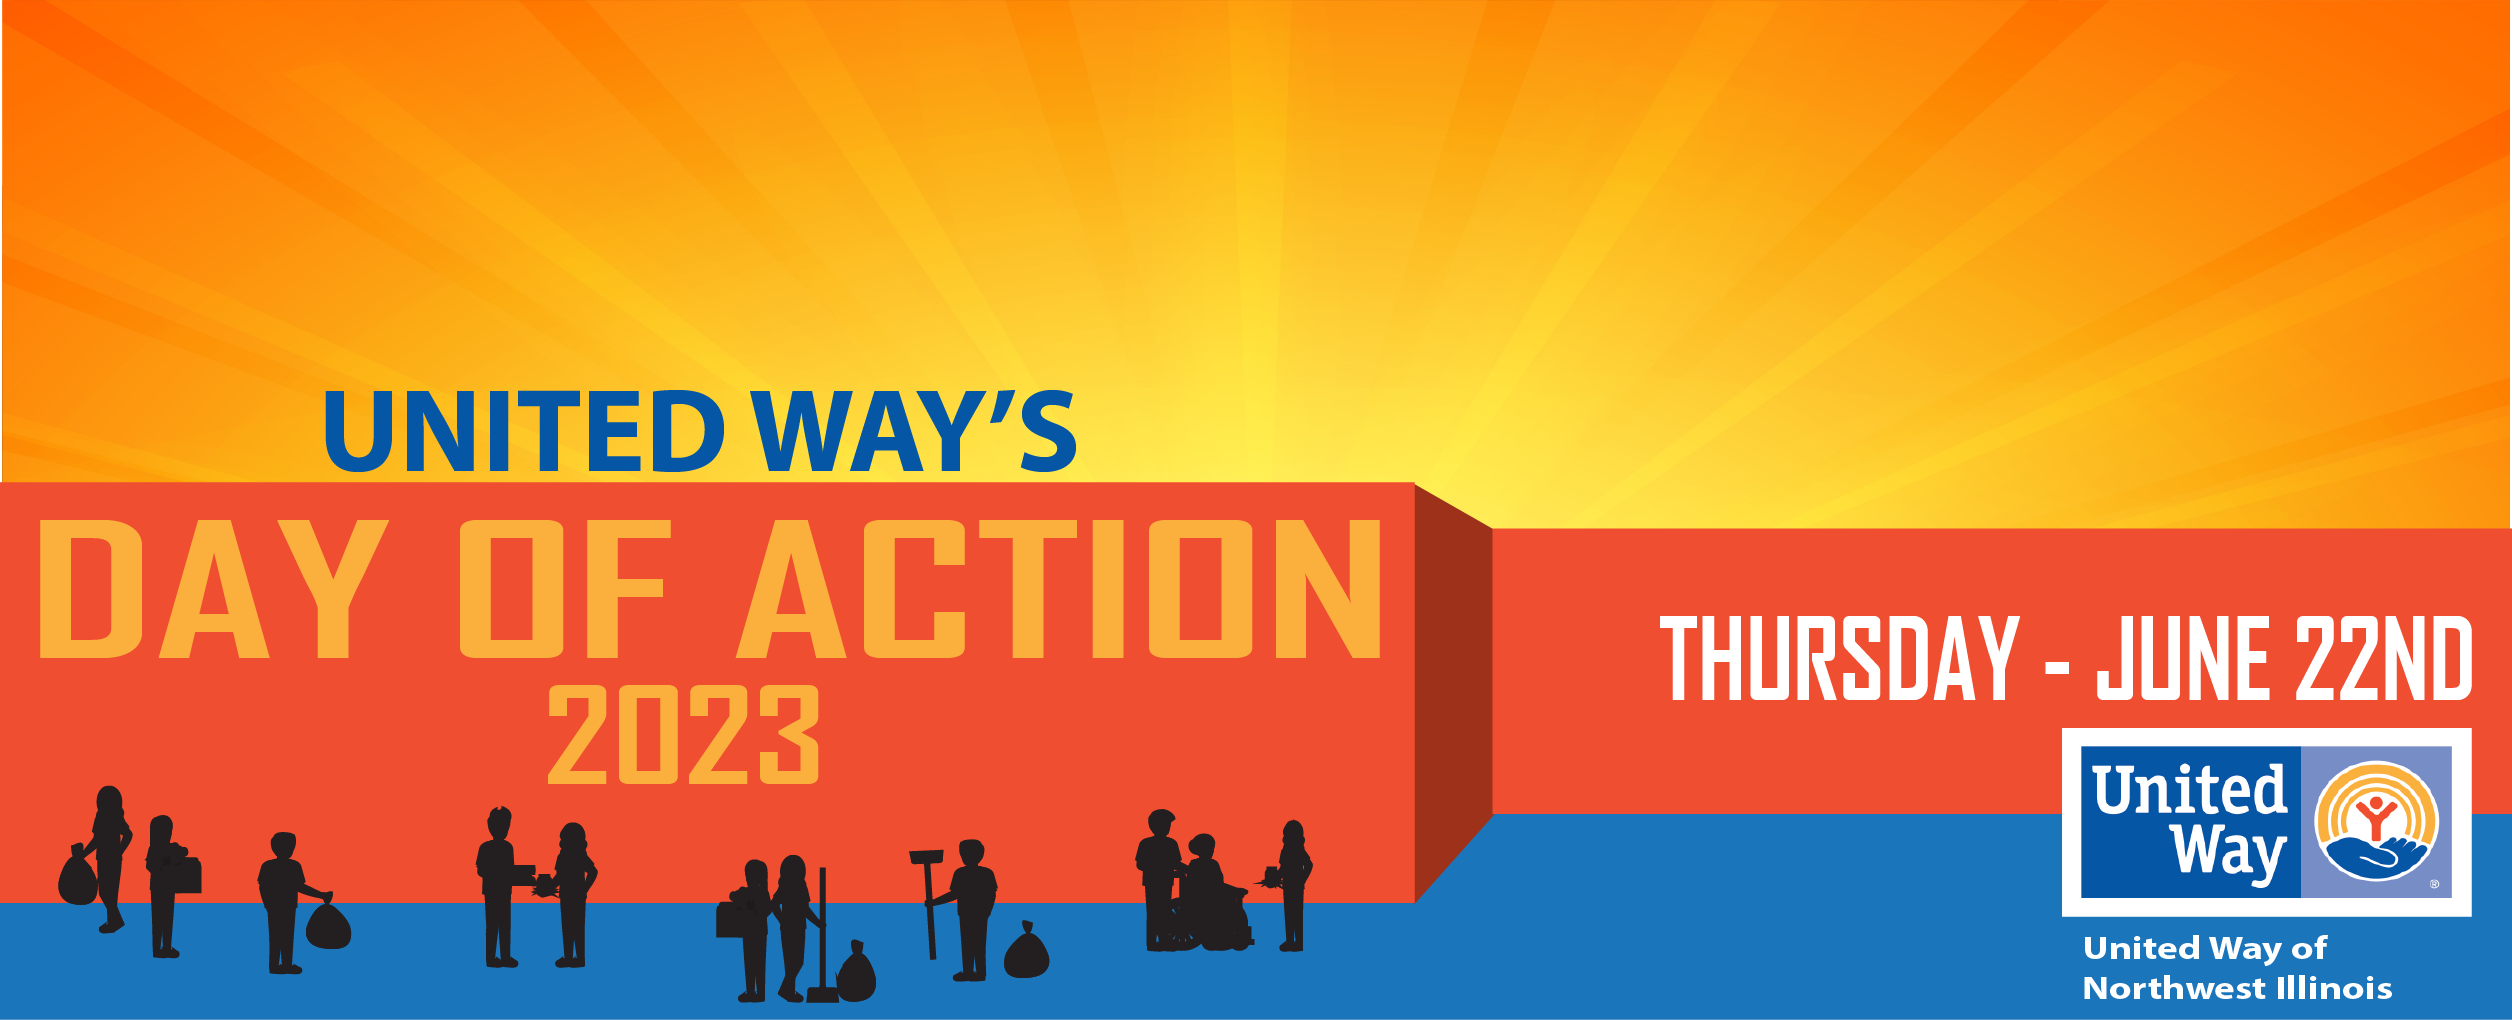 Day of Action 2023 is June 22nd